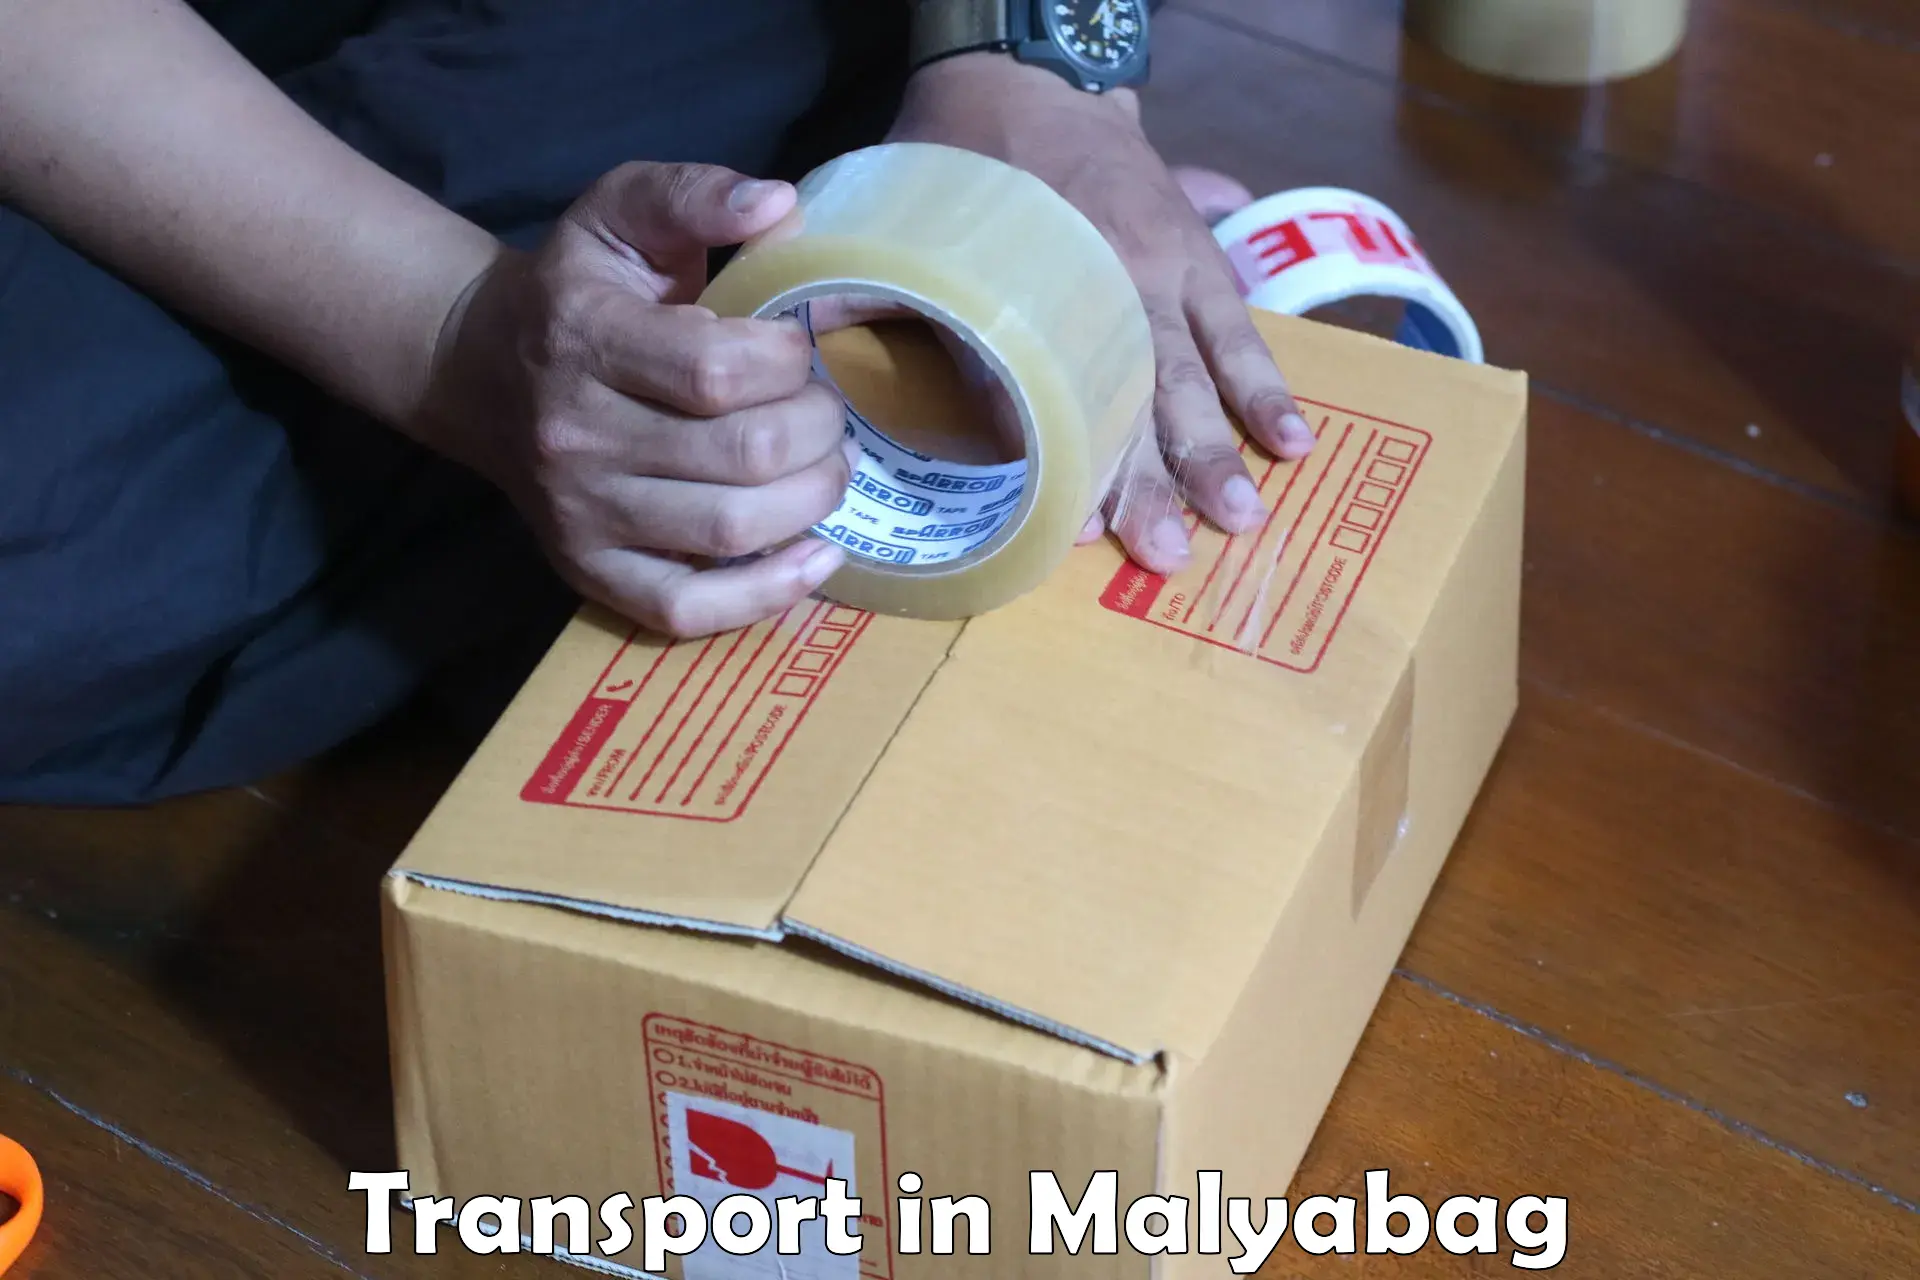 Container transportation services in Malyabag